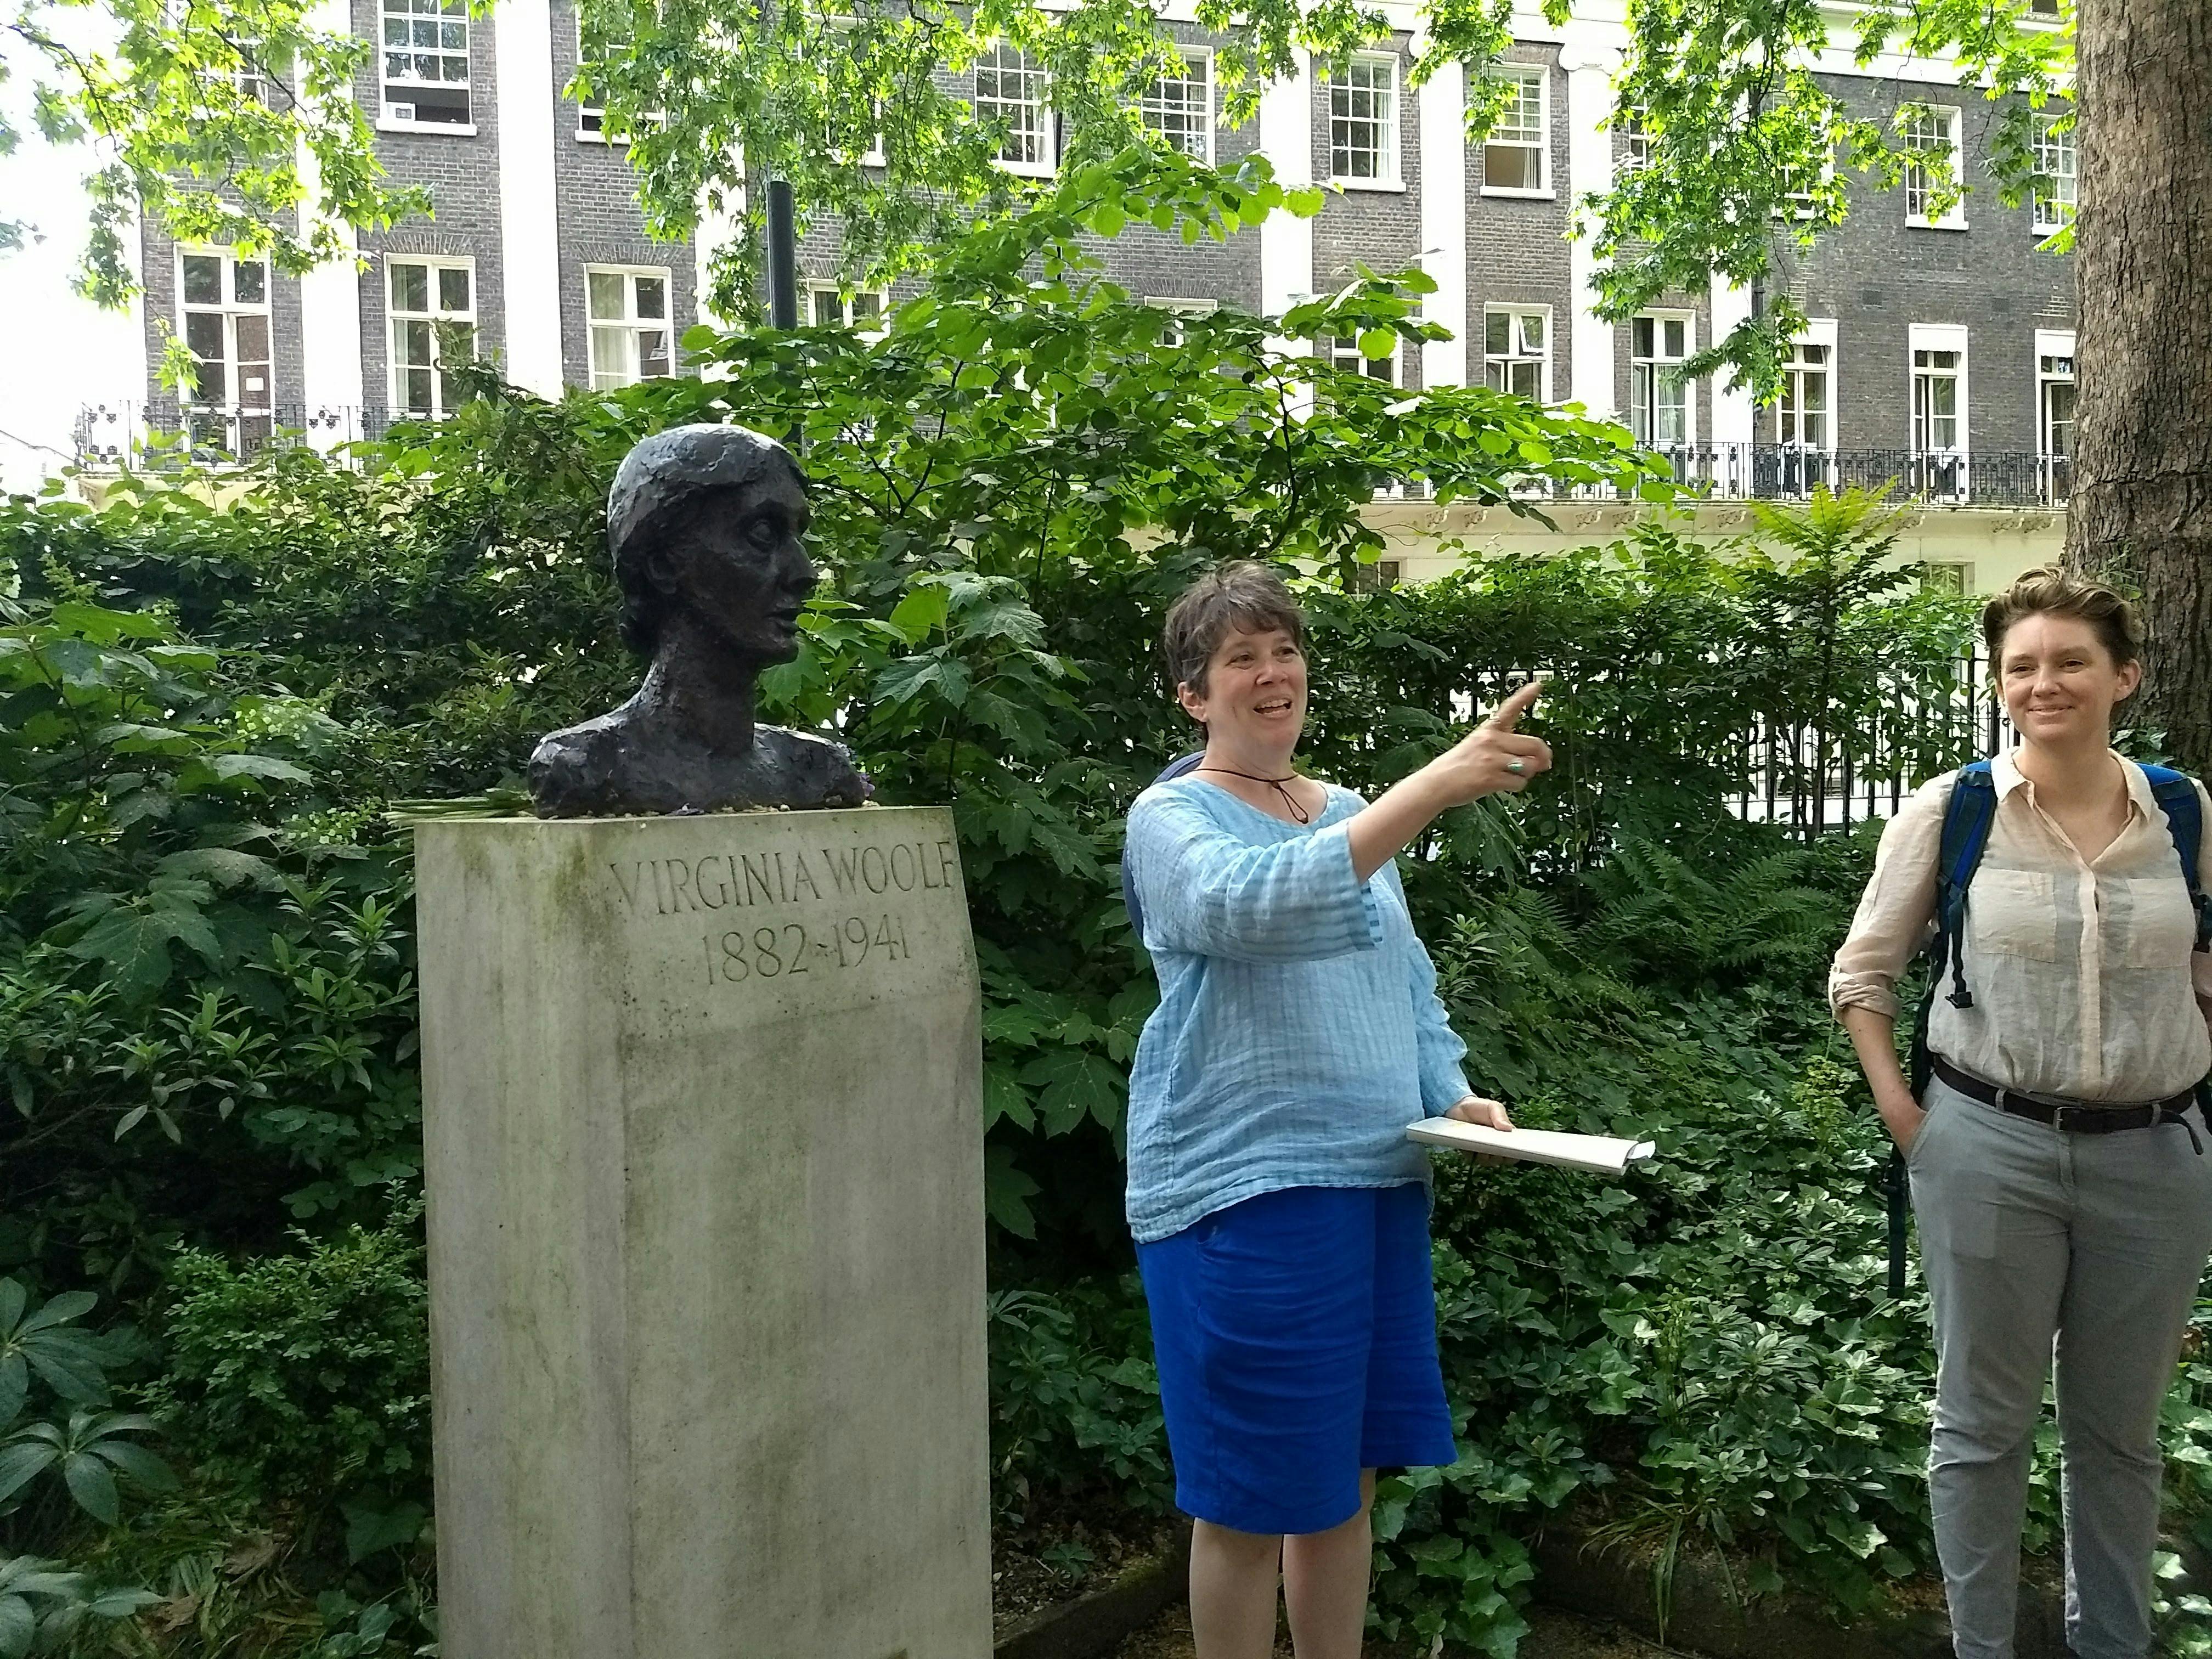 A bust of Virginia Woolf at the pilgrimage